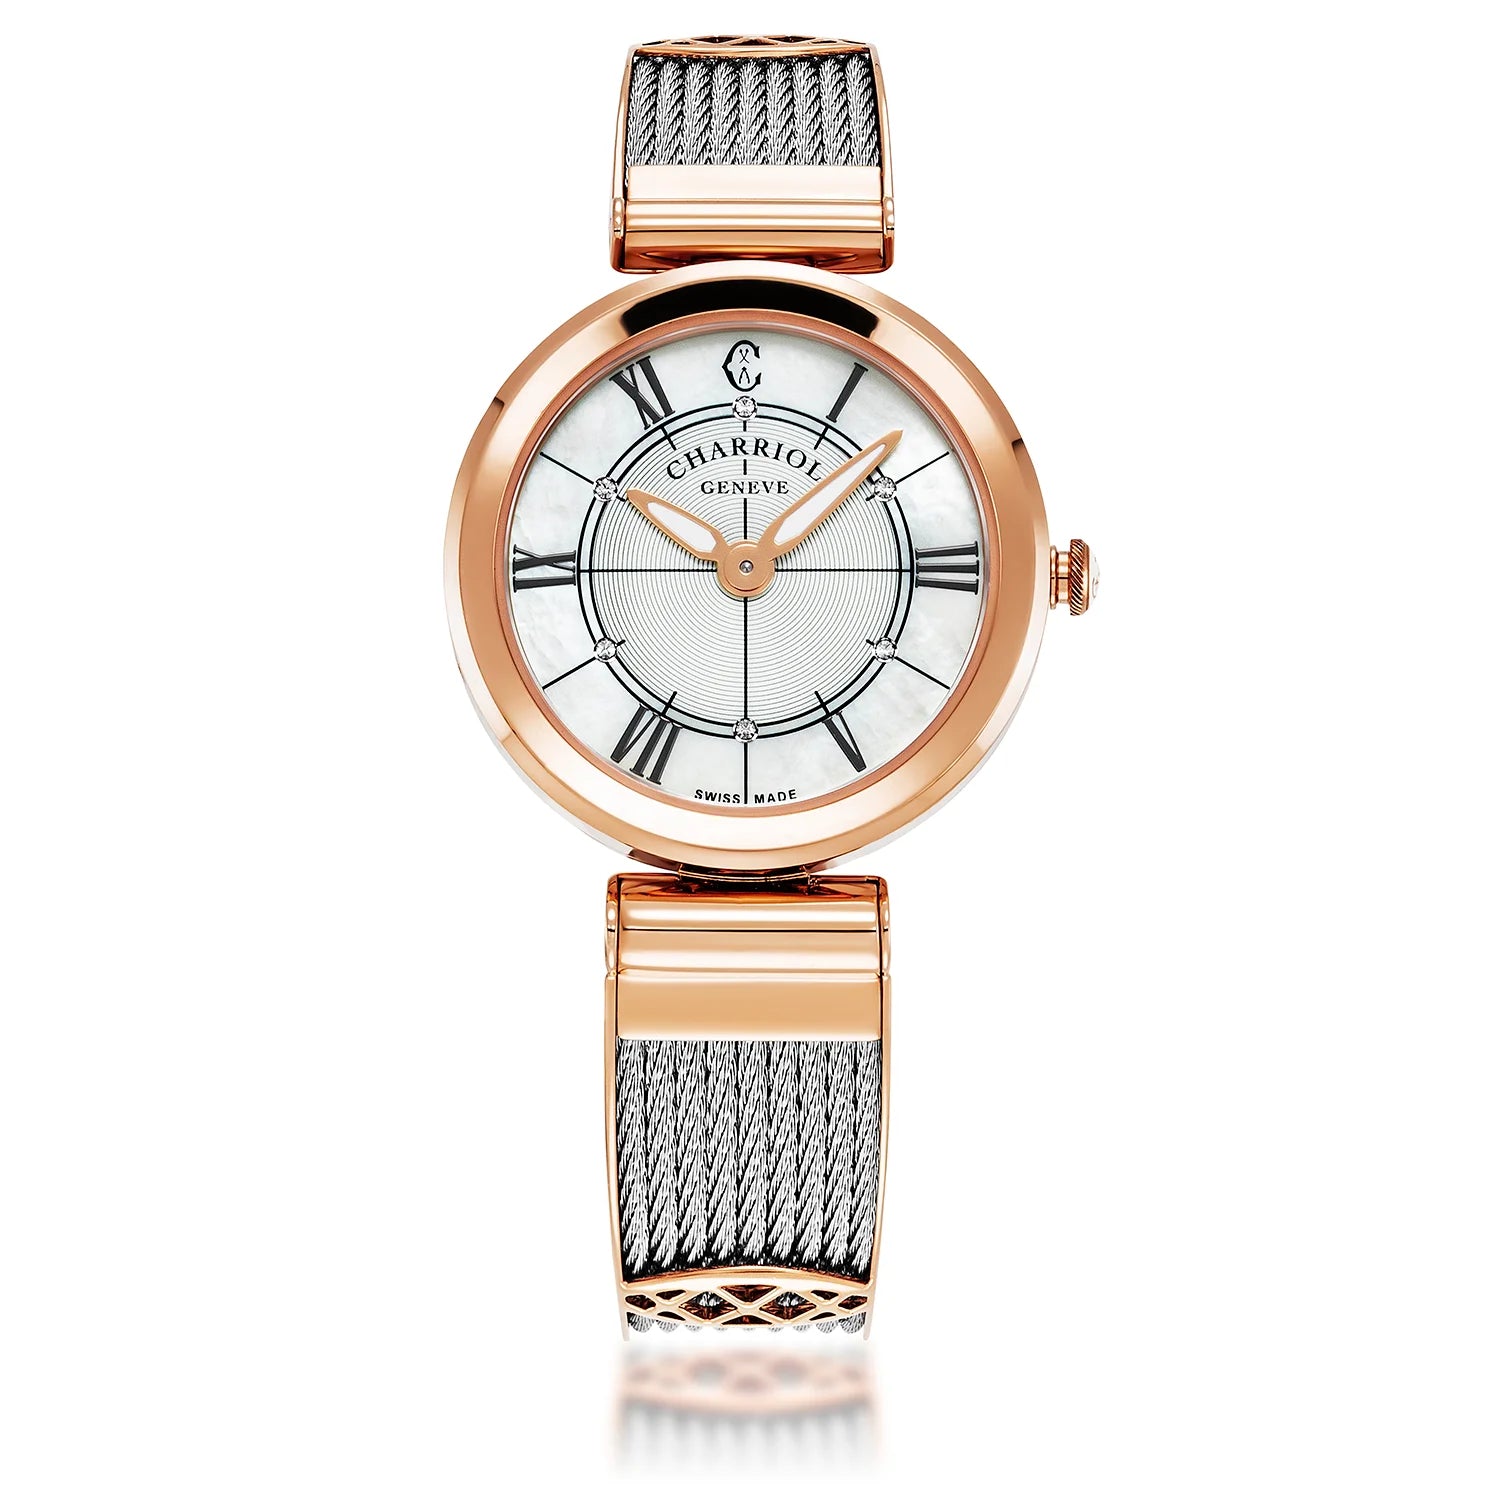 FOREVER, 32MM, QUARTZ CALIBRE, MOTHER-OF-PEARL DIAL, ROSE GOLD PVD BEZEL, STEEL CABLE BRACELET - Charriol Geneve -  Watch